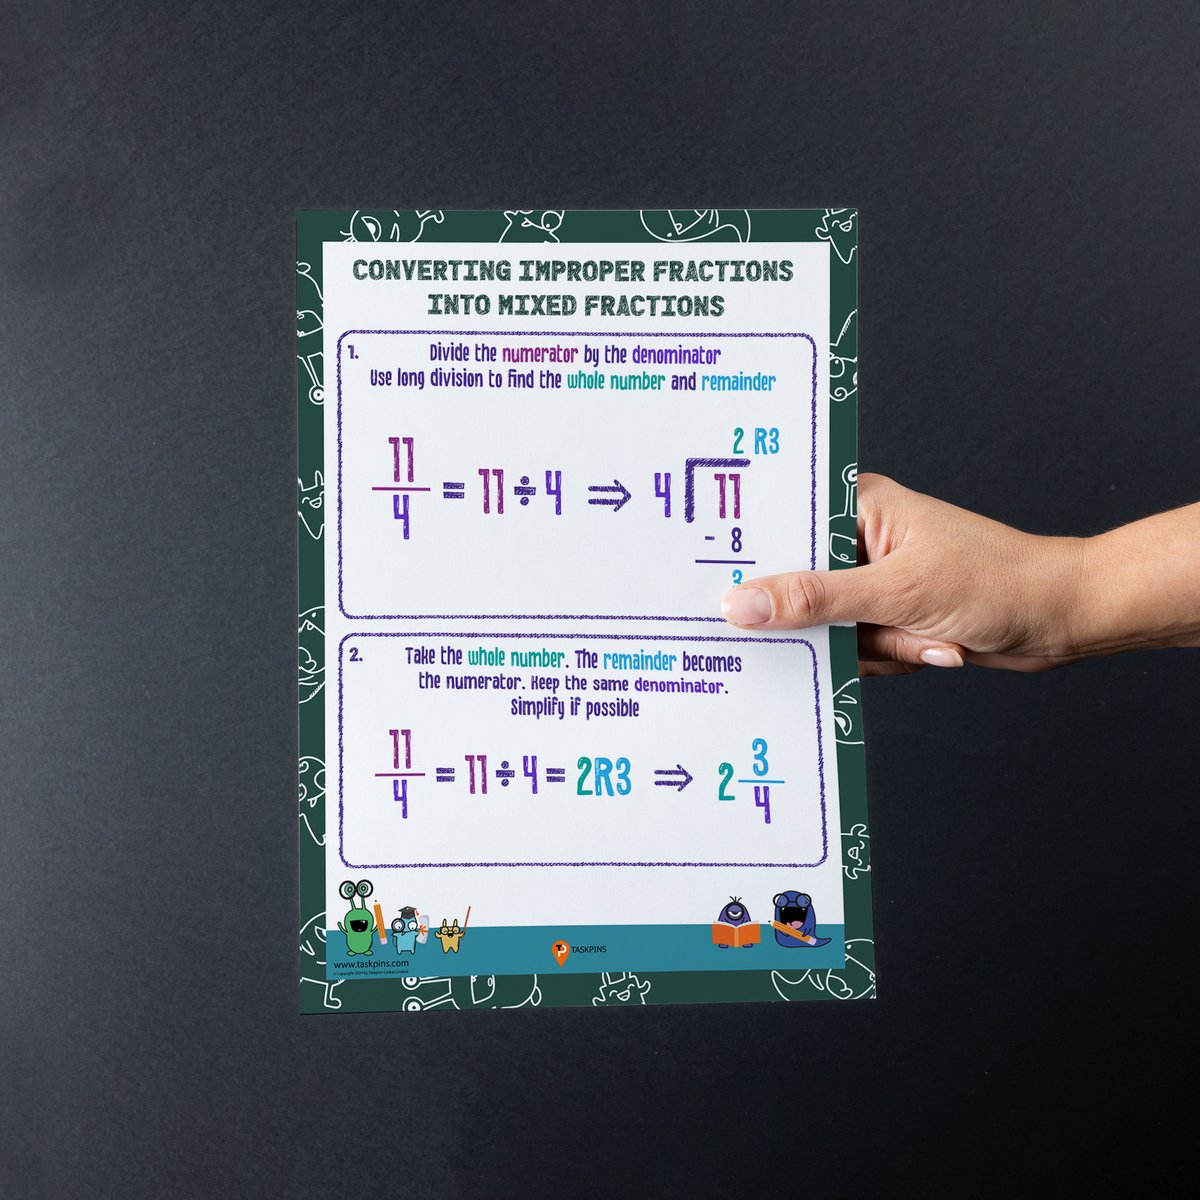 Do you teach math? These posters are designed to help your students understand how improper fractions are converted into mixed fractions. 

#math #mathteacher #mathtutor